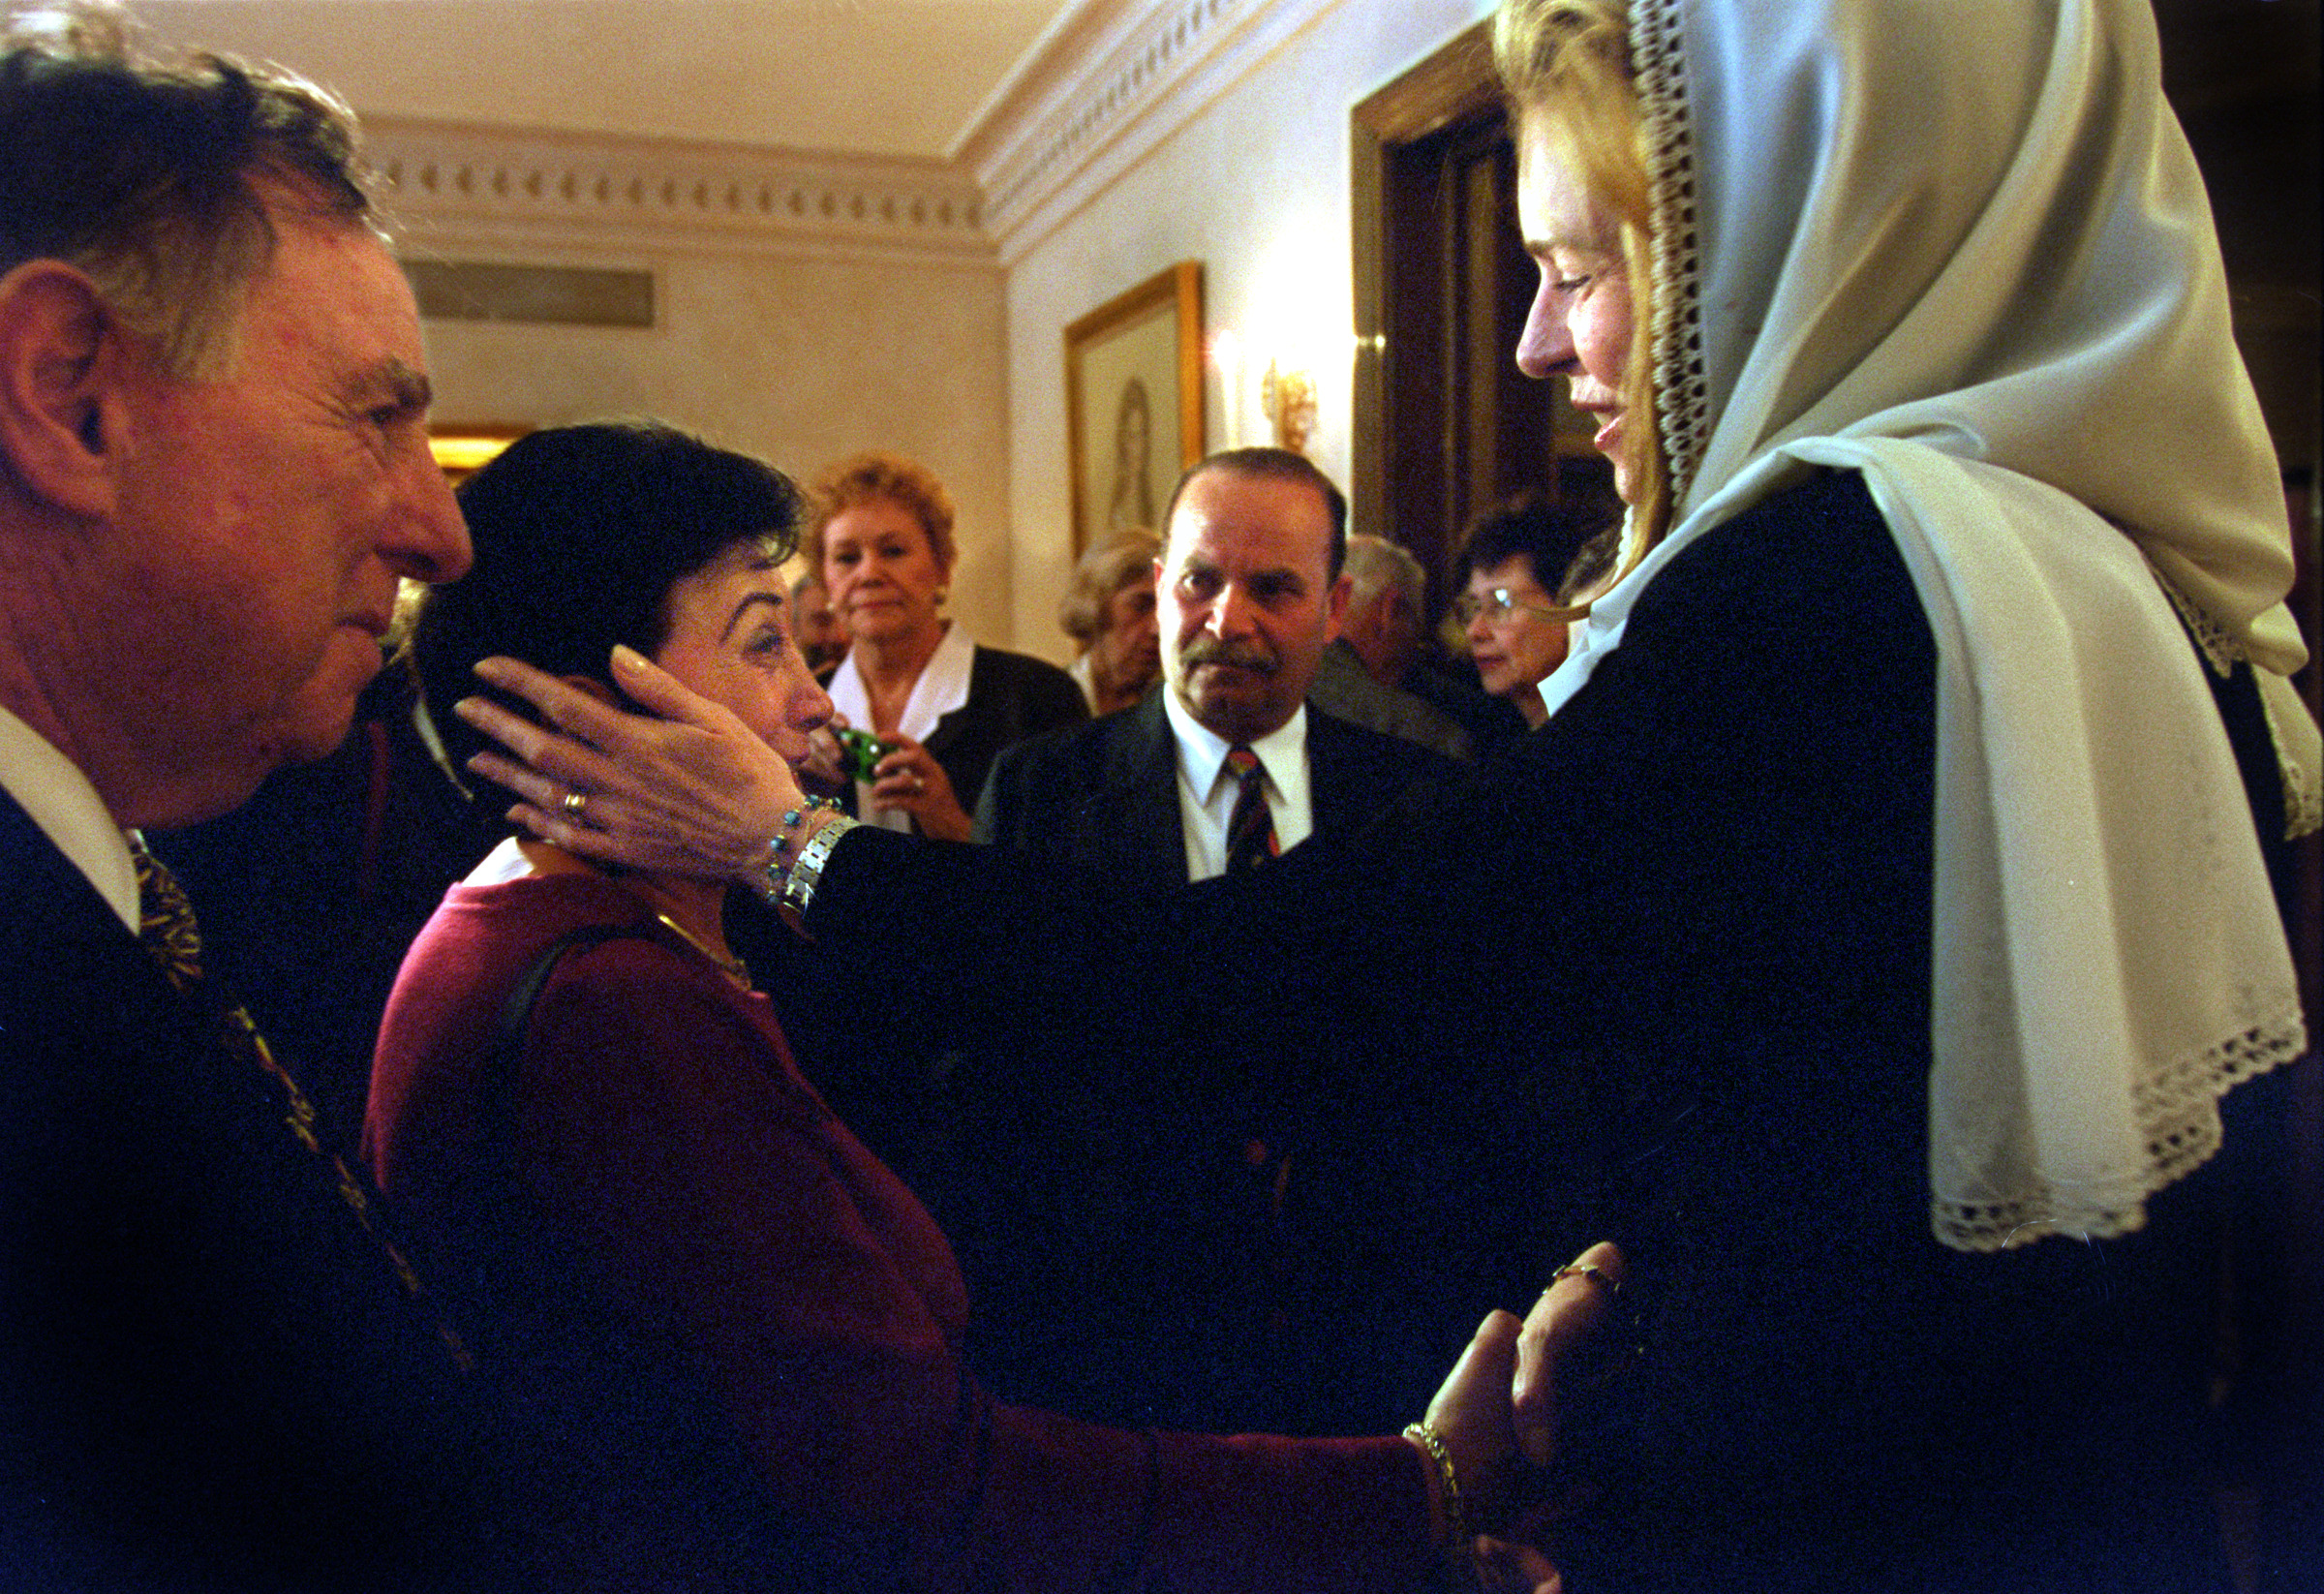  Left, Martin Klein and his wife Florence are greeted by Queen Noor in the royal palace in Amman Jordan. The Interfaith group experienced many religious and cultural encounters during their travels throughout Israel and the Kingdom of Jordan.&nbsp;©G